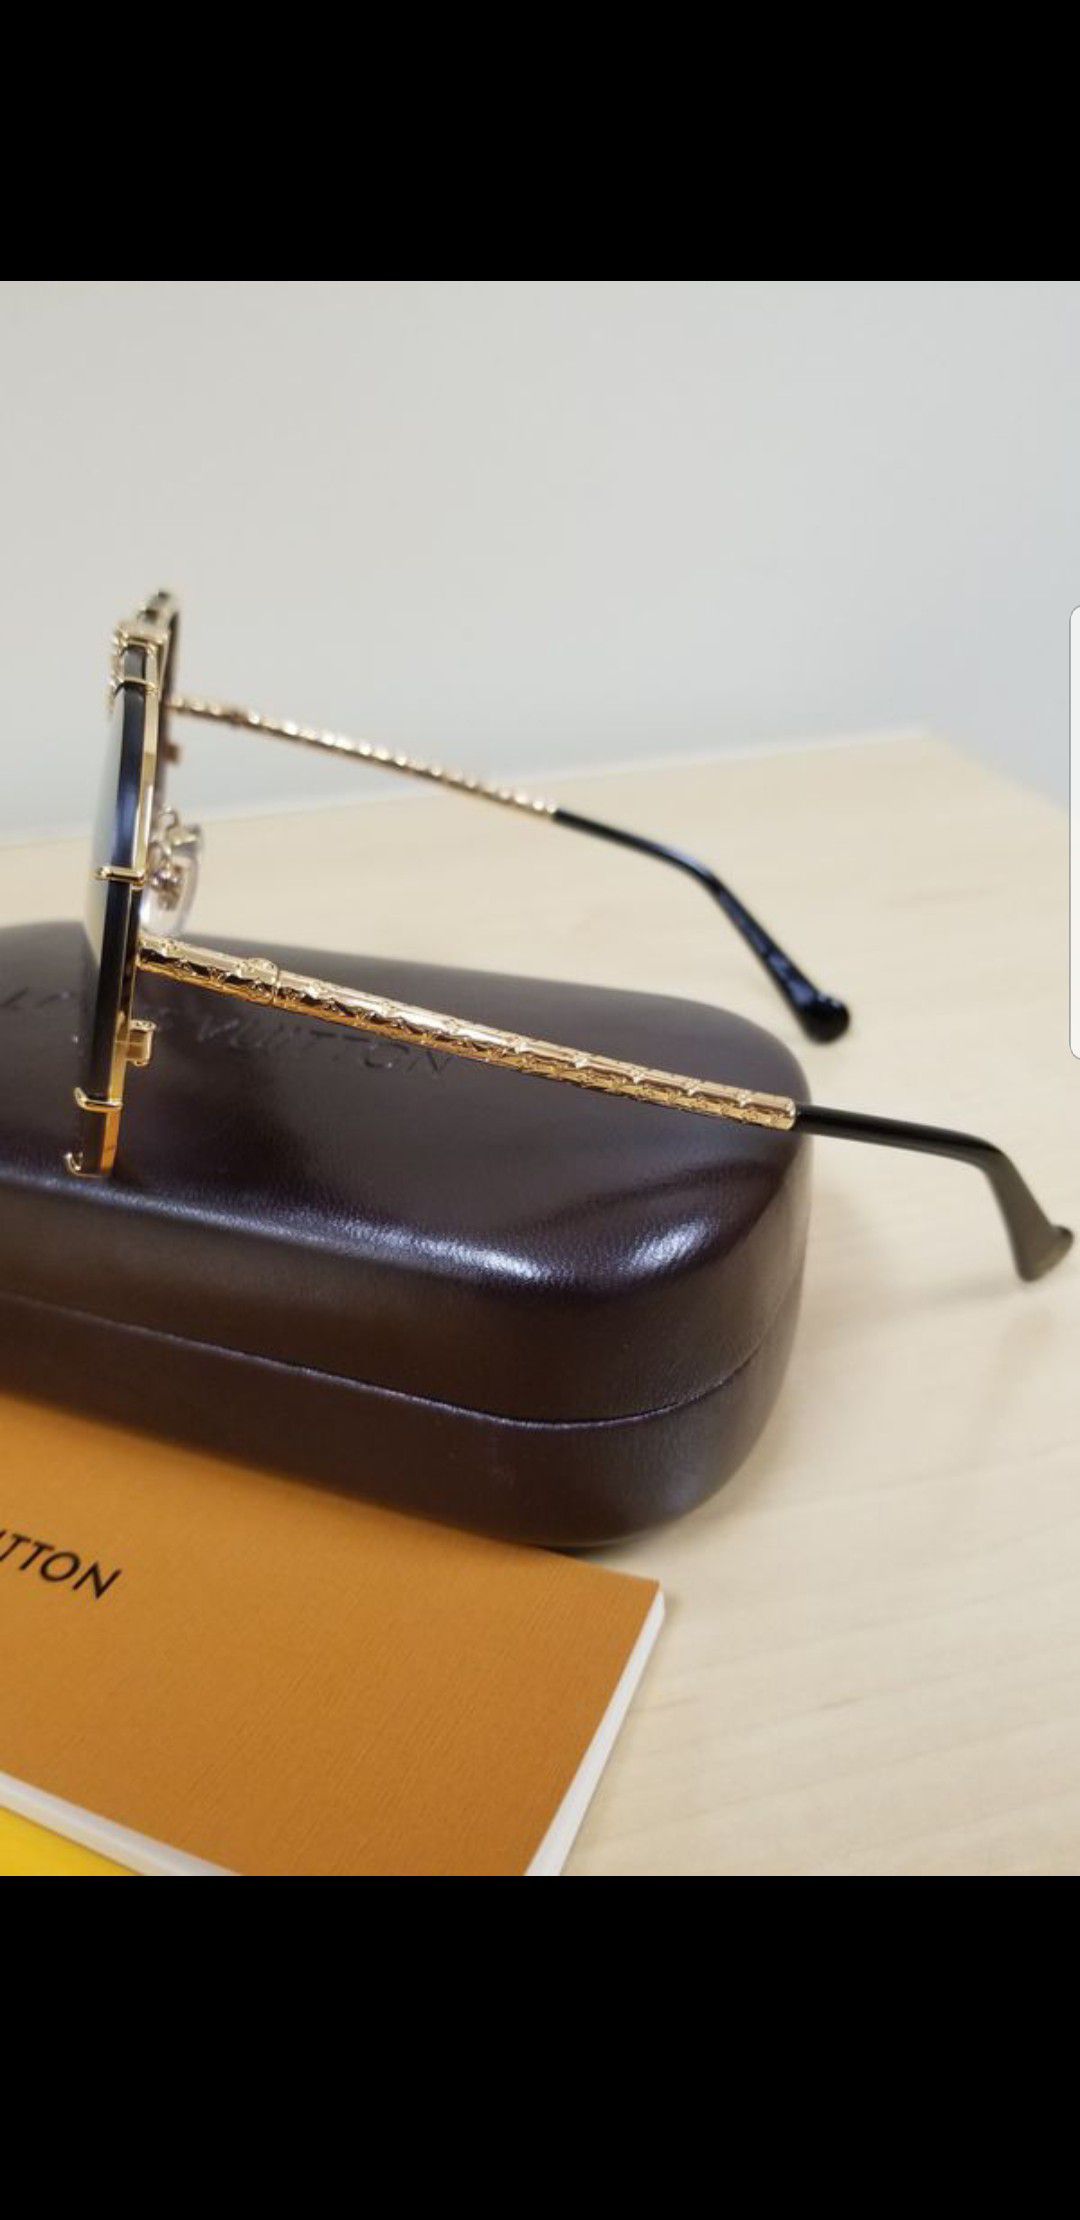 Authentic Louis Vuitton Millionaire LV Drive Strass Z1060 Dark Lens/Gold  Framed Sunglasses for Sale in Aurora, CO - OfferUp